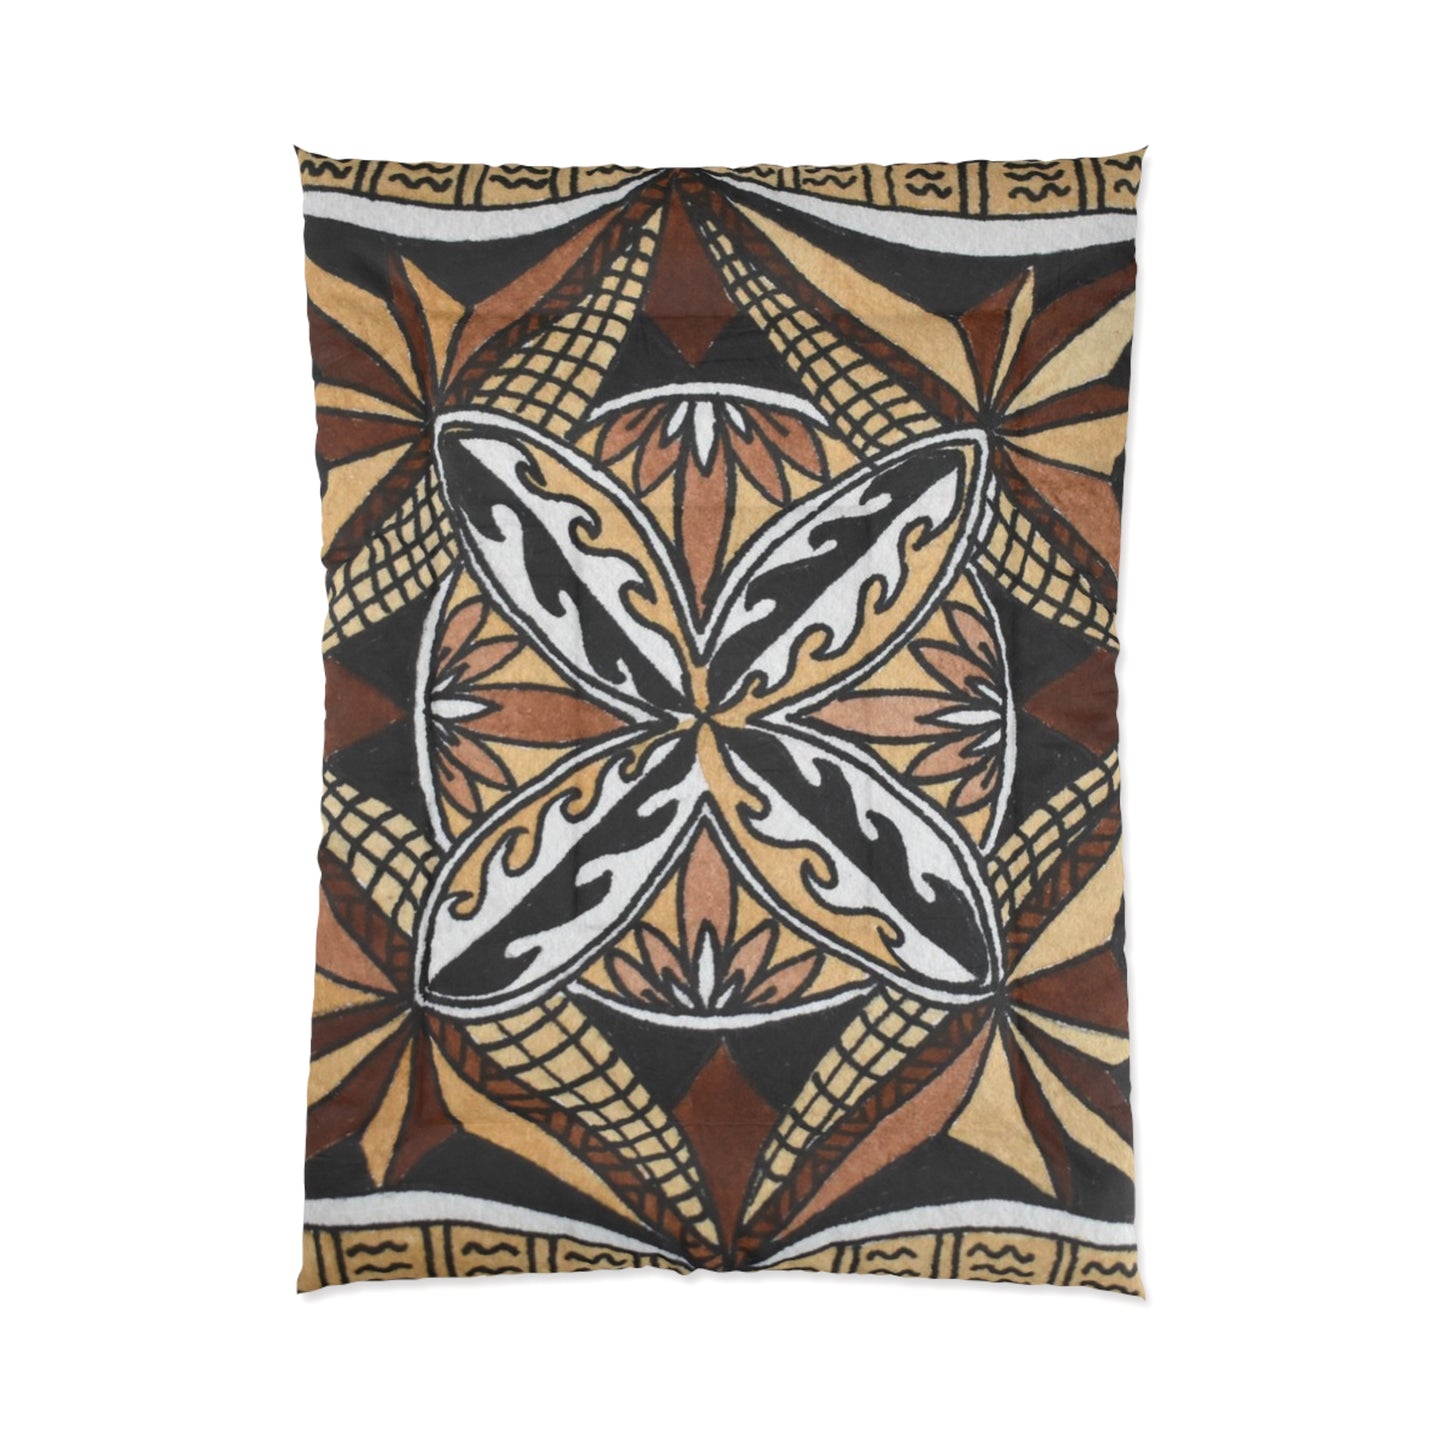 The Ultimate Comfort Doona Blanket with a Square Tapa Design